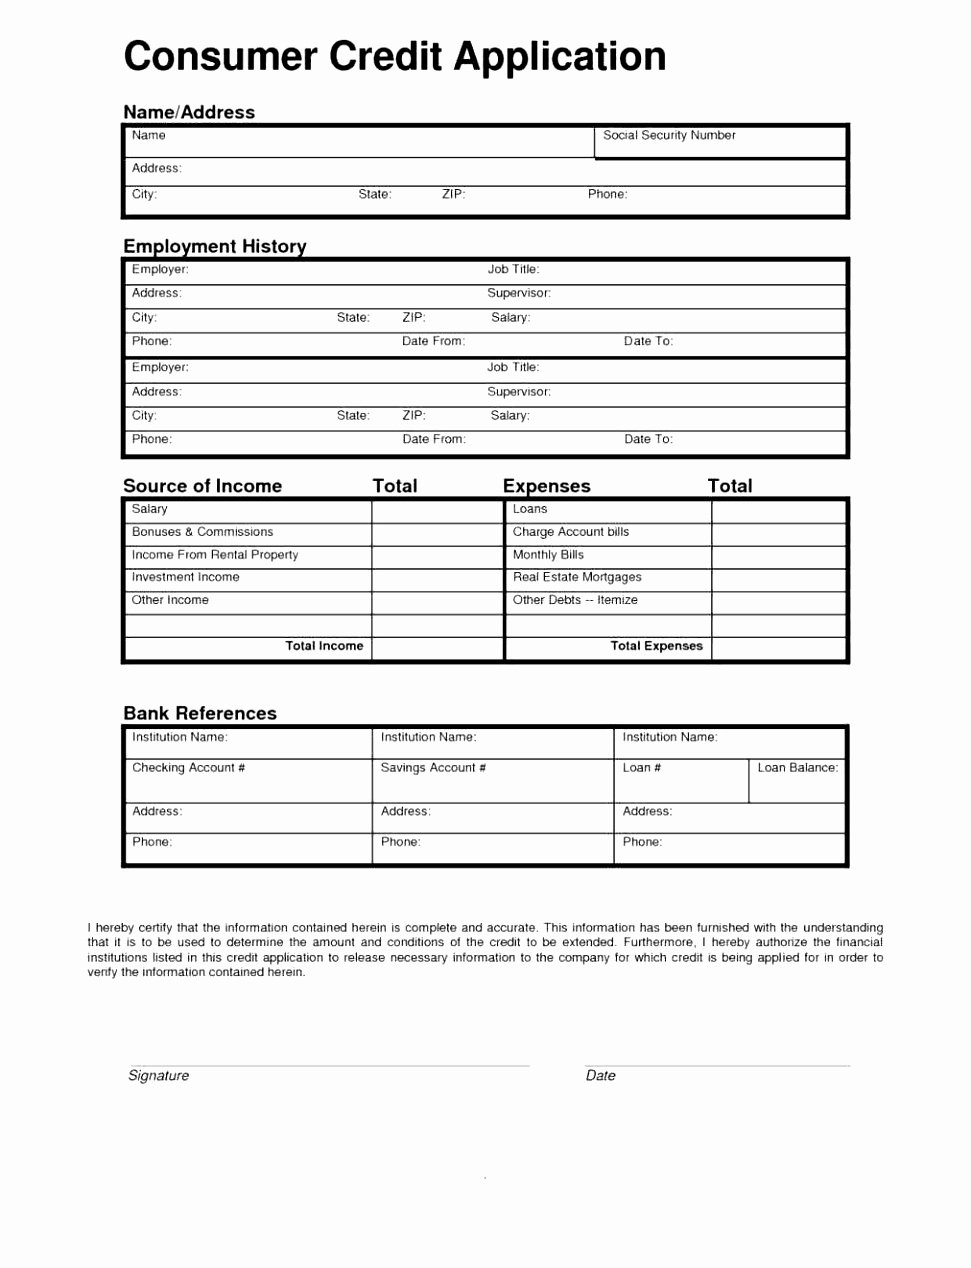 Customer Credit Application Template Beautiful Credit Application forms 9 Documents Free Download In